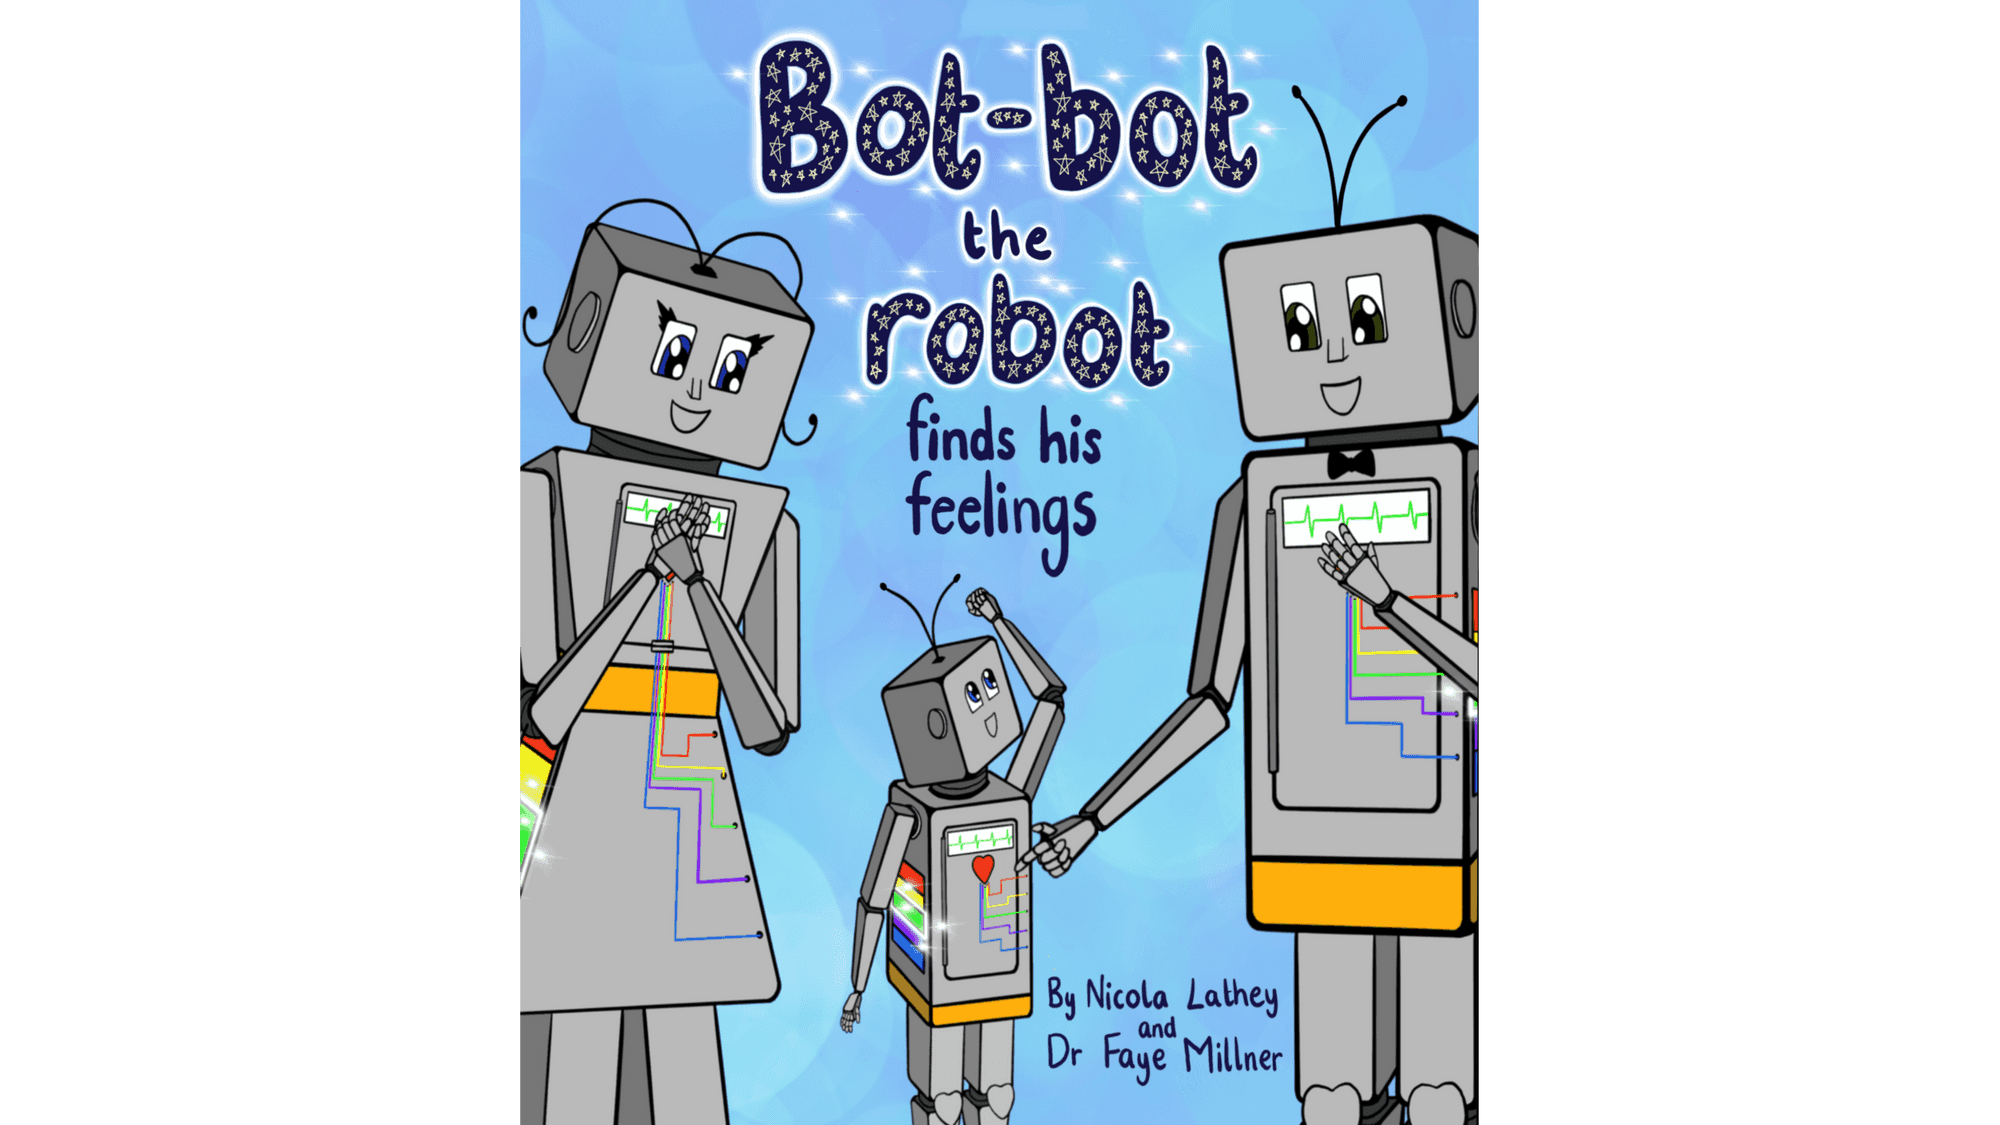 Book: Bot-bot the robot: finds his feelings